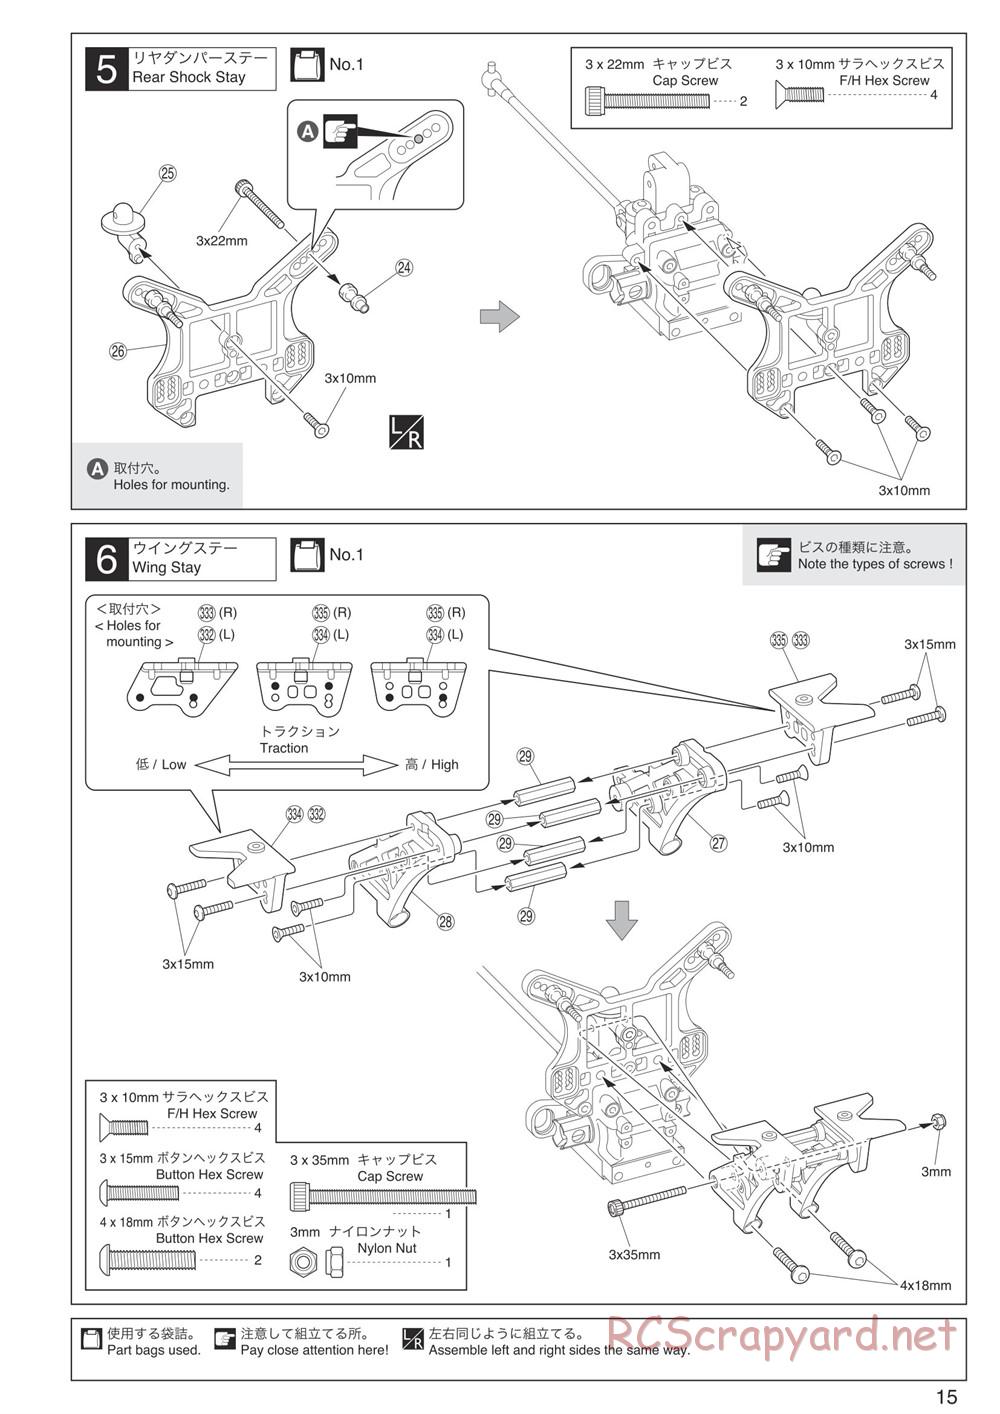 Kyosho - Inferno MP9 TKI4 10th Anniversary Special Edition - Manual - Page 15